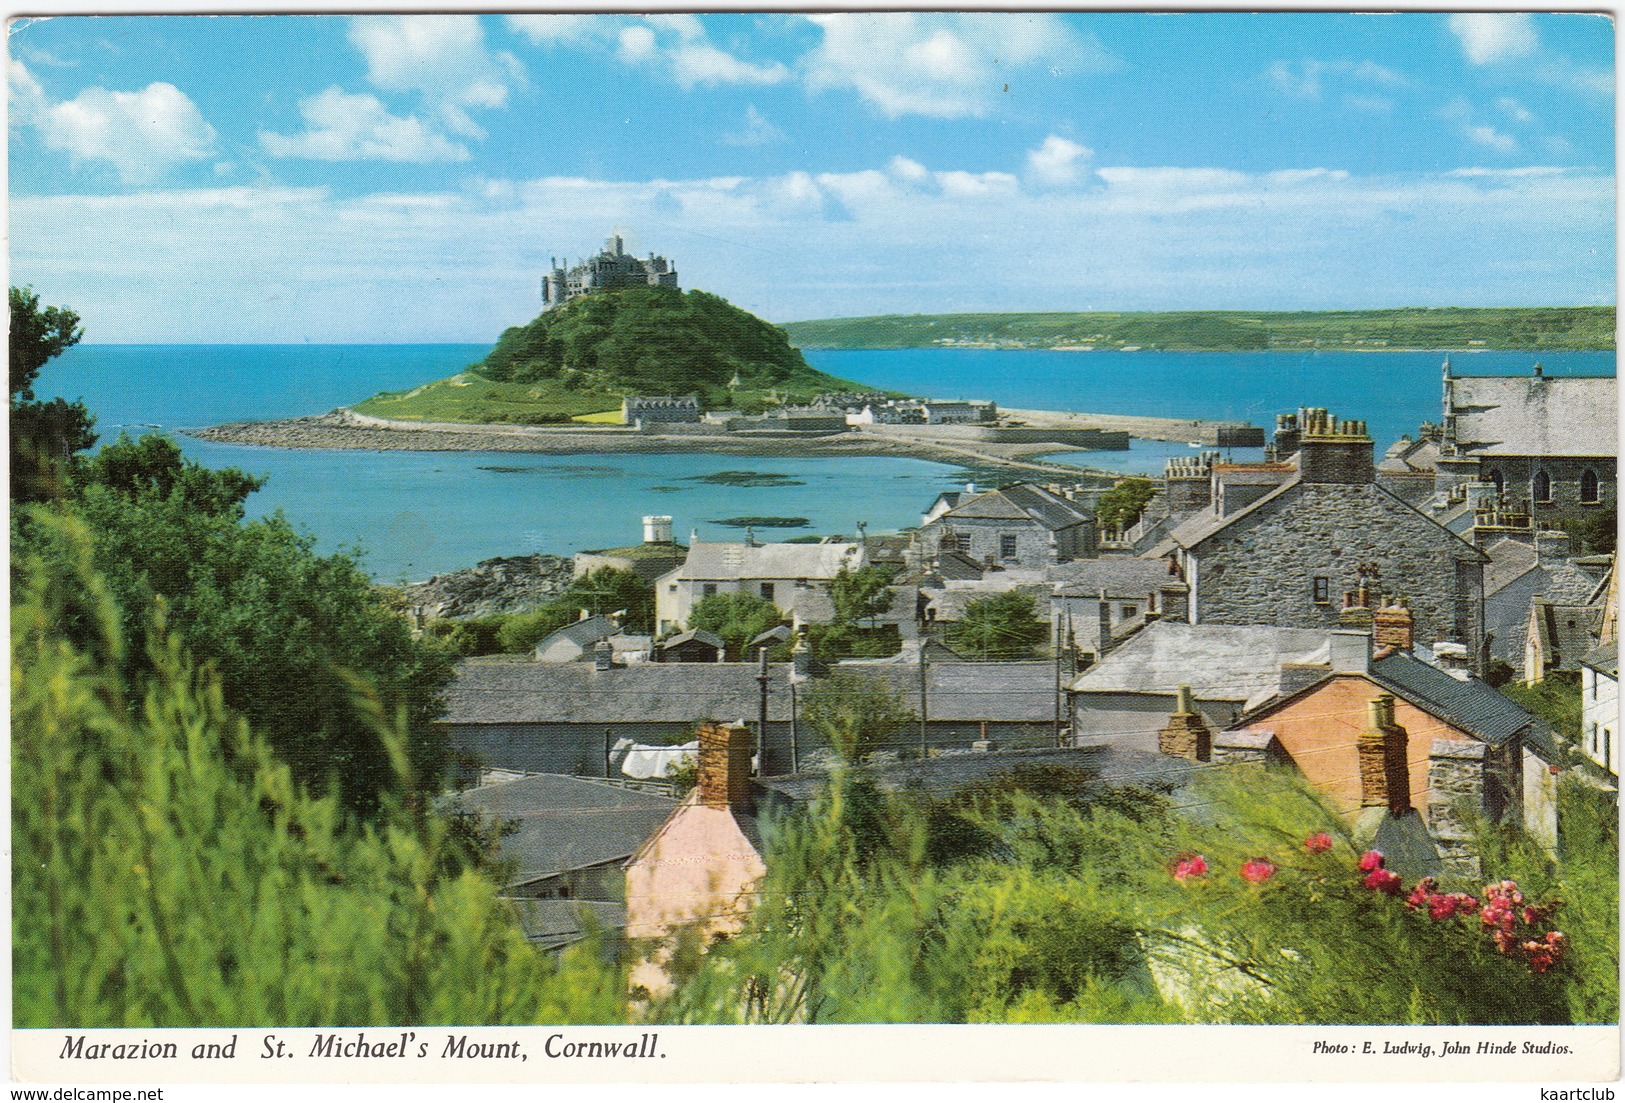 Marazion And St. Michael's Mount - (1969) - (Cornwall, England) - John Hinde - St Michael's Mount